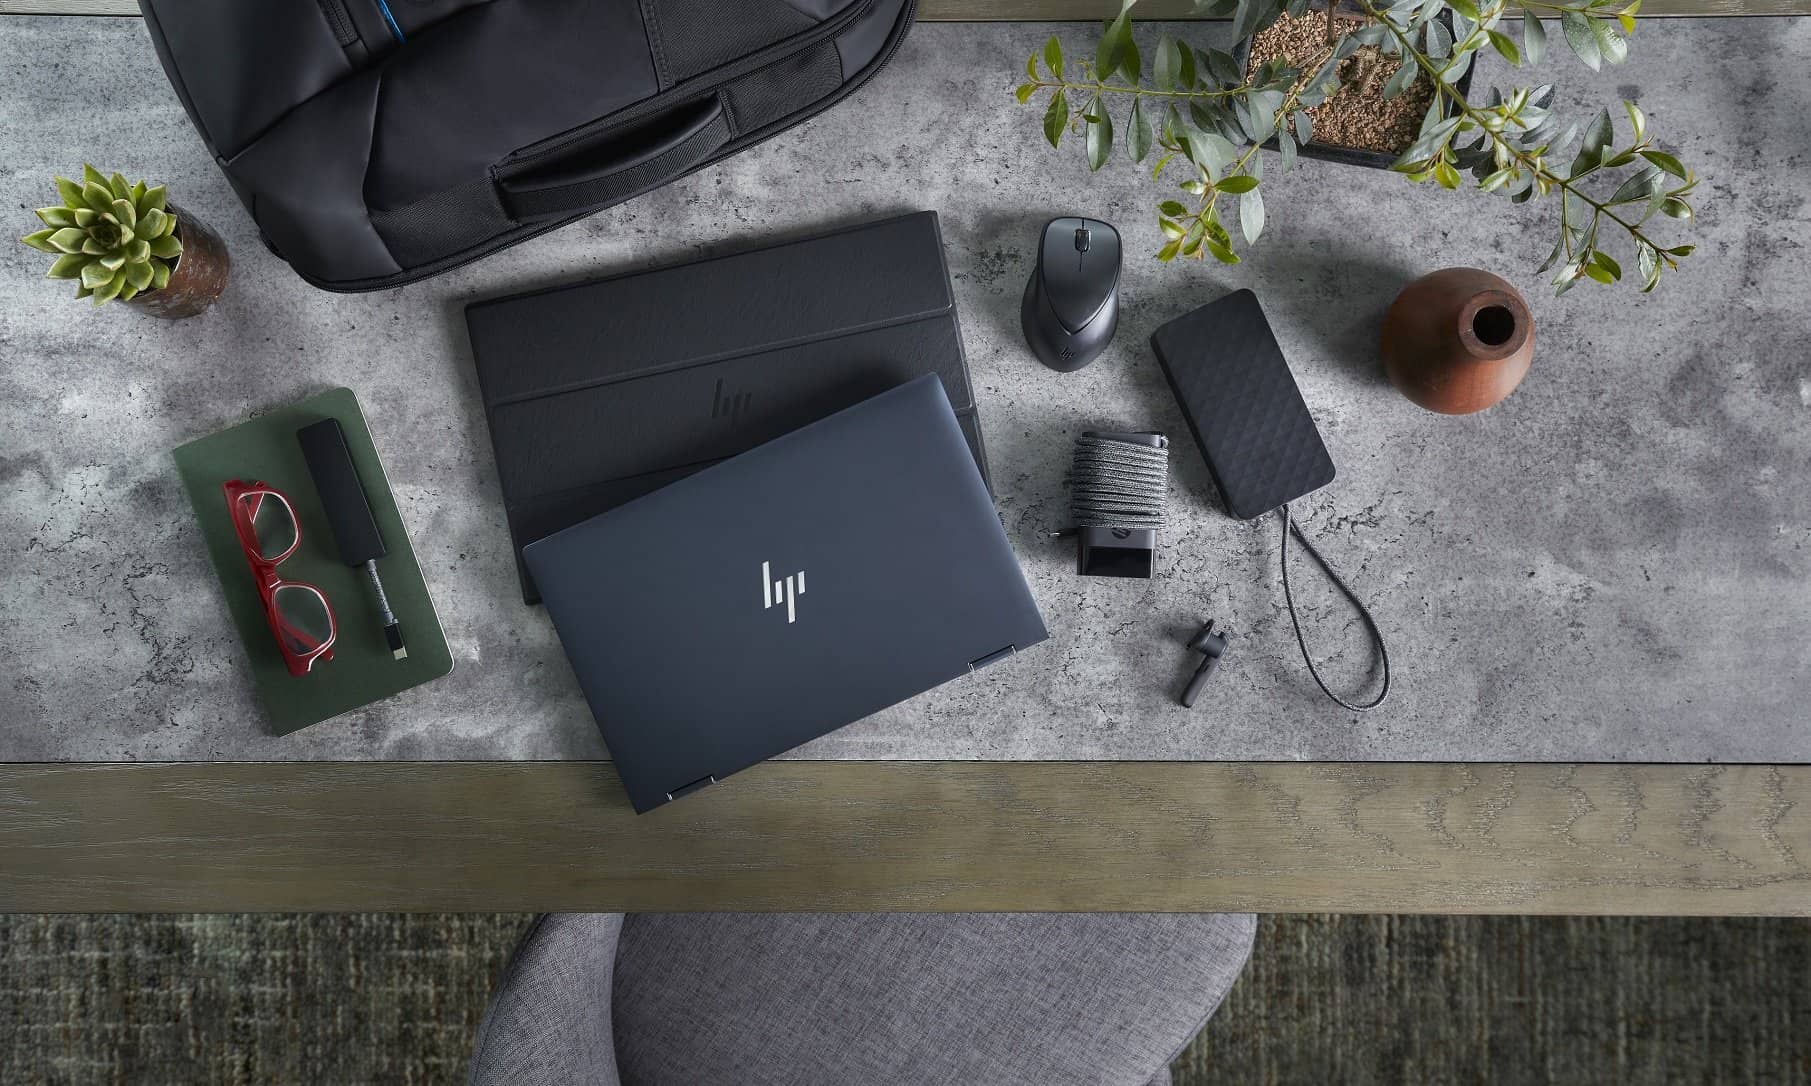 The HP Elite Dragonfly Officially Launches in the UAE